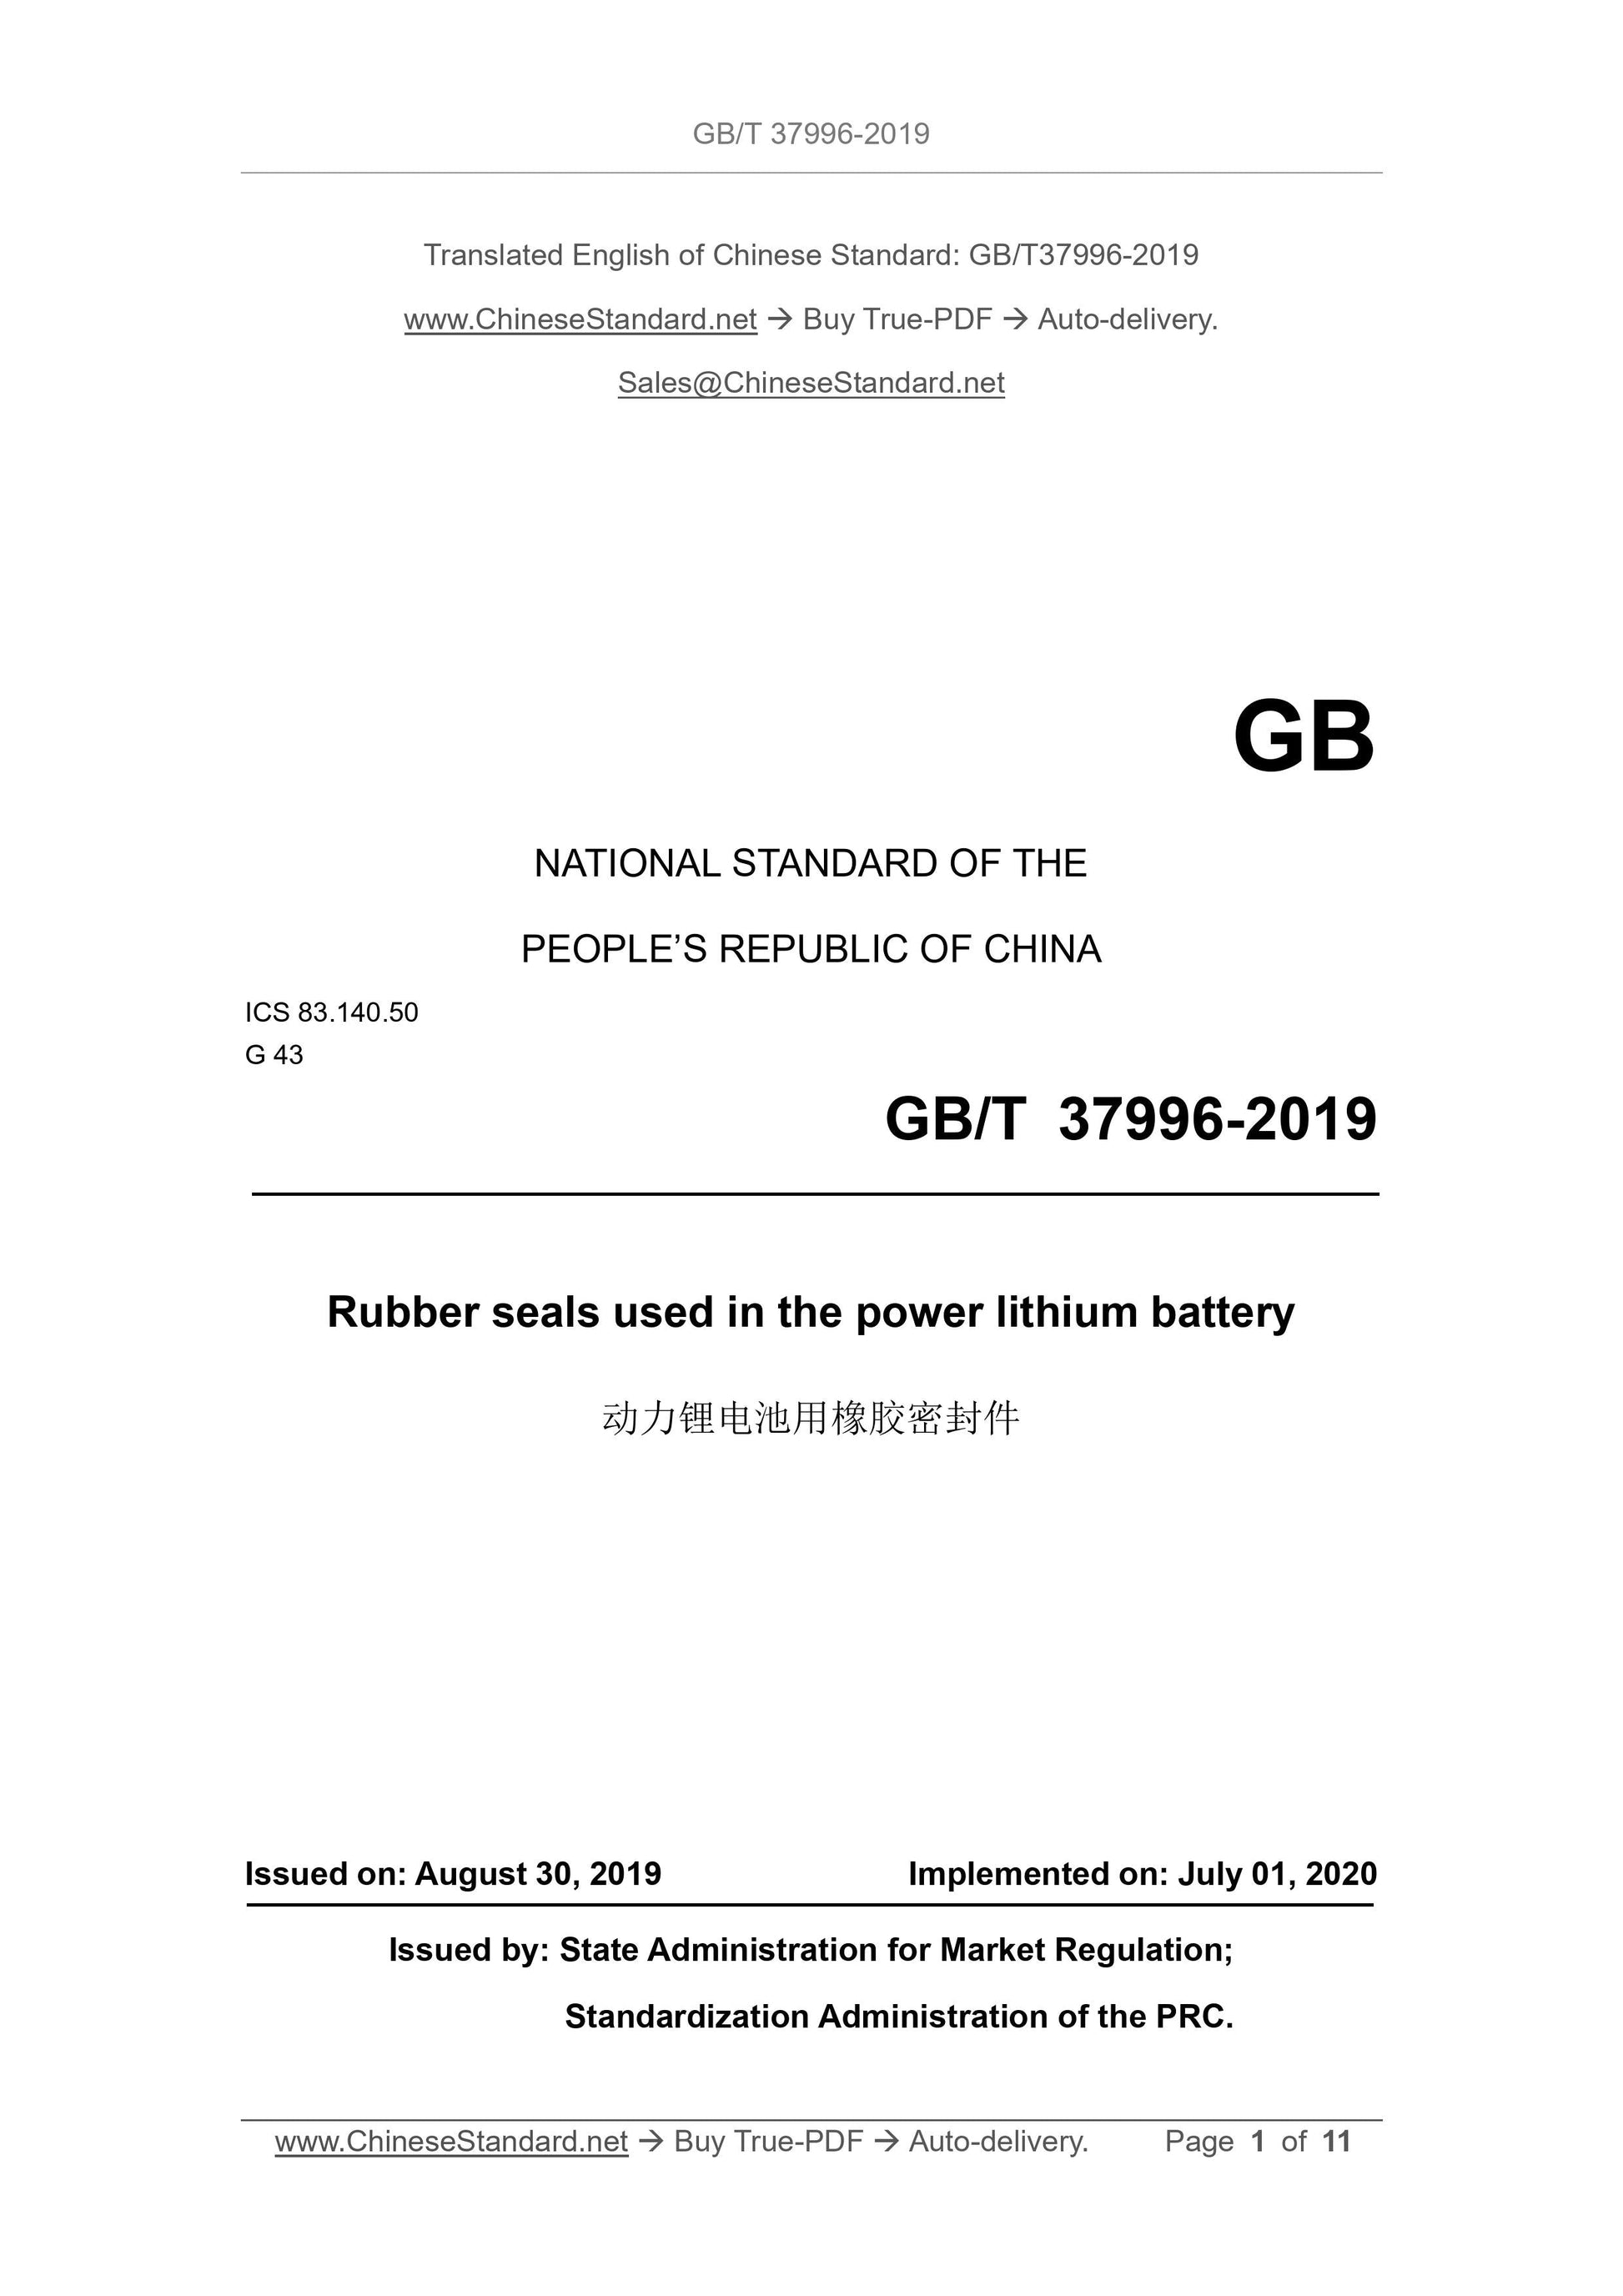 GB/T 37996-2019 Page 1